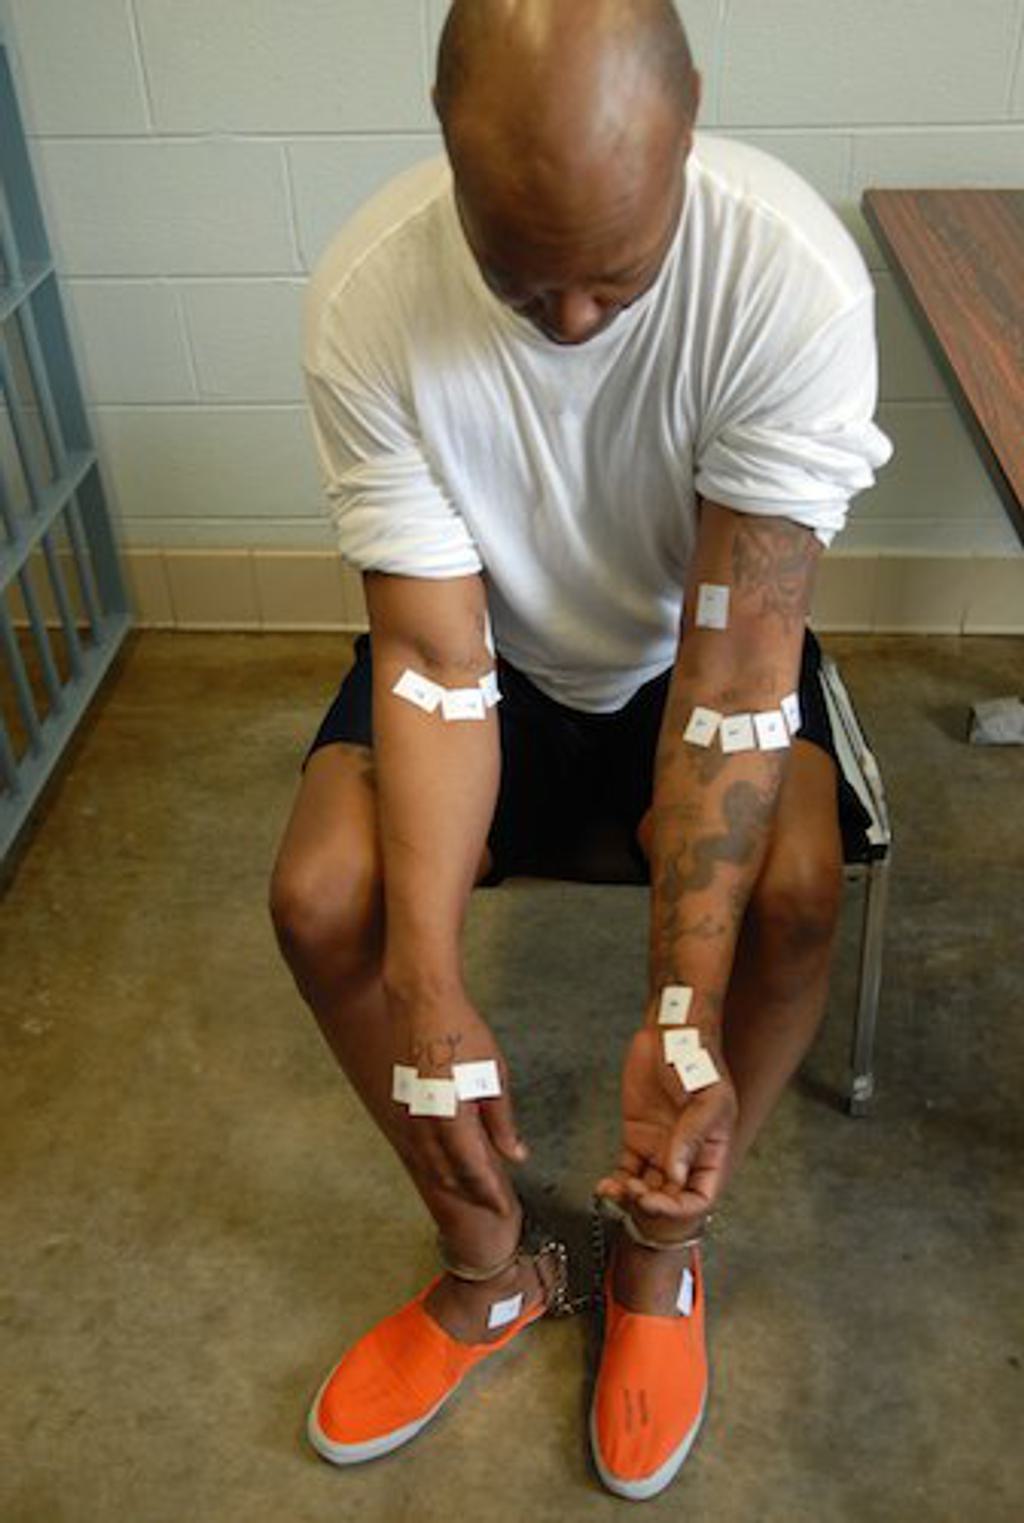 Romell Broom displays the 18 different locations in which Ohio execution personnel unsuccessfully attempted to set an intravenous line to execute him in September 2009.